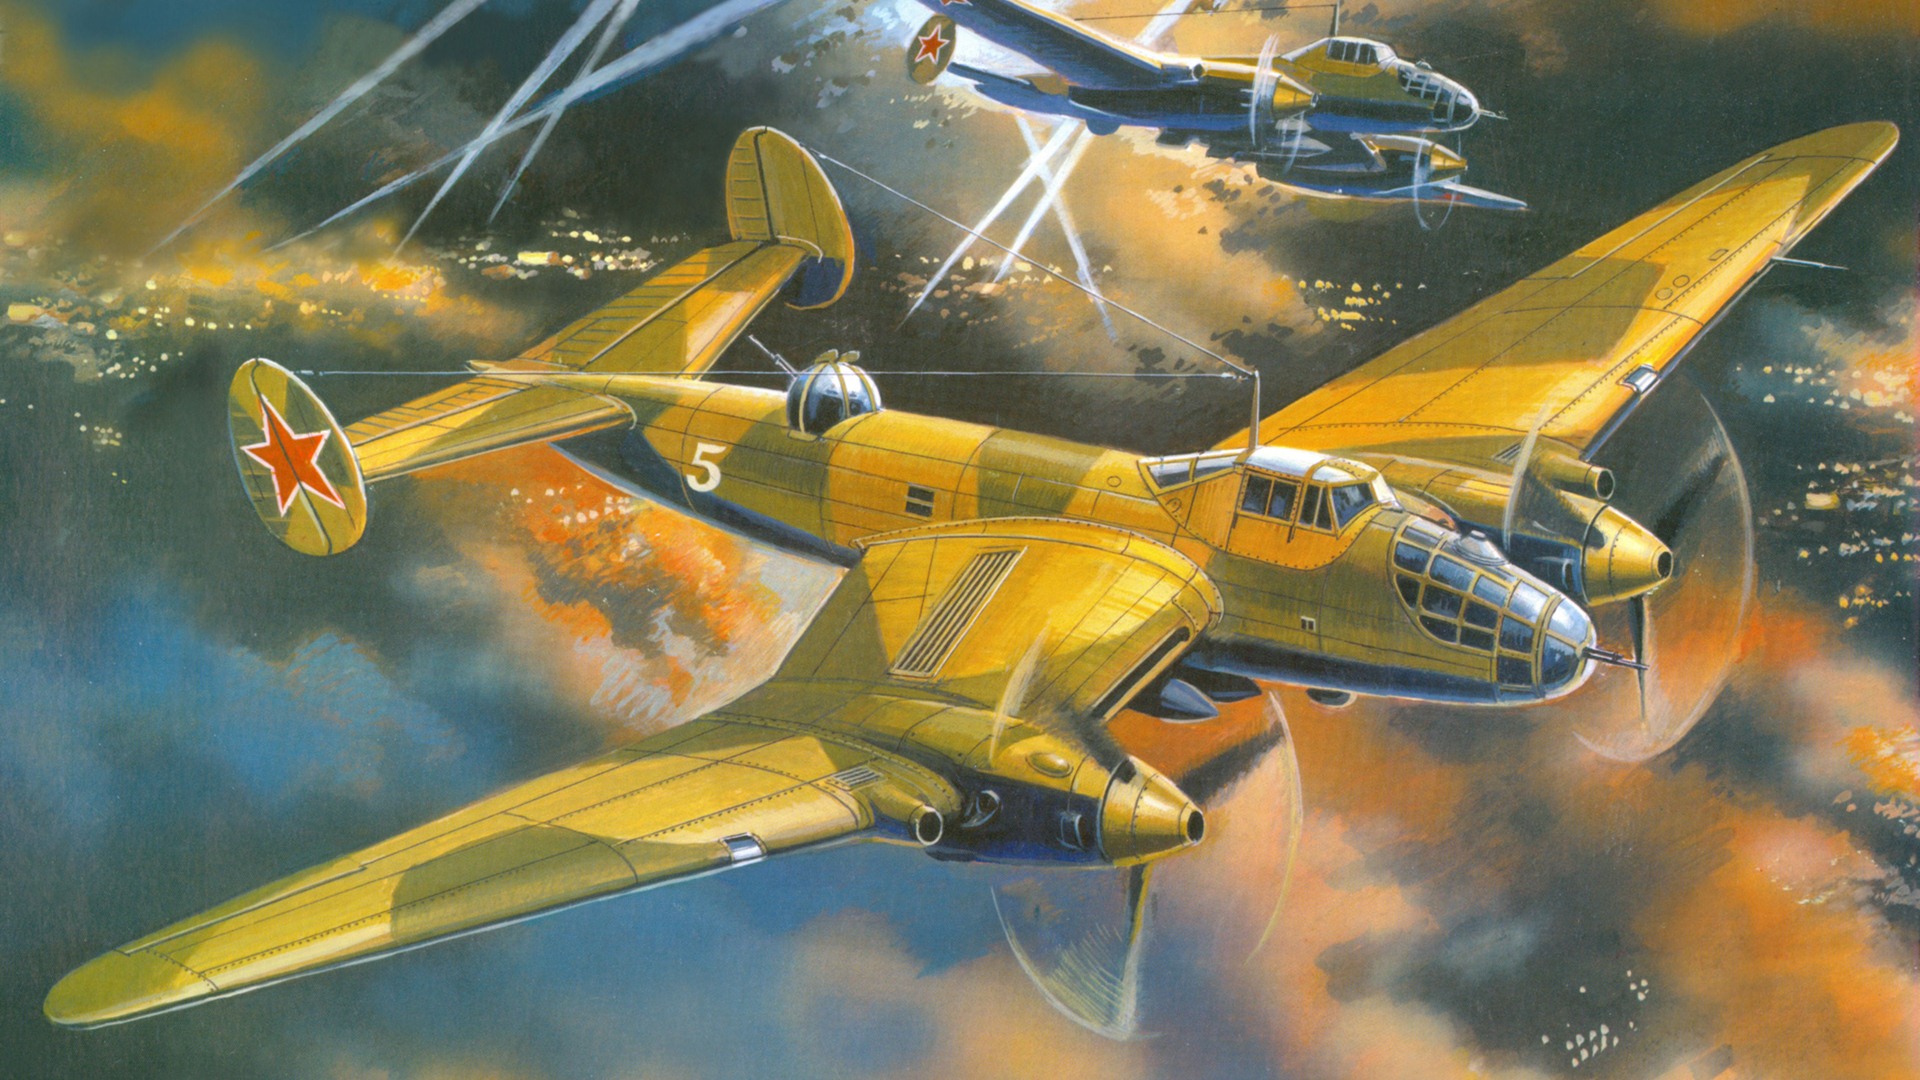 Military aircraft flight exquisite painting wallpapers #18 - 1920x1080